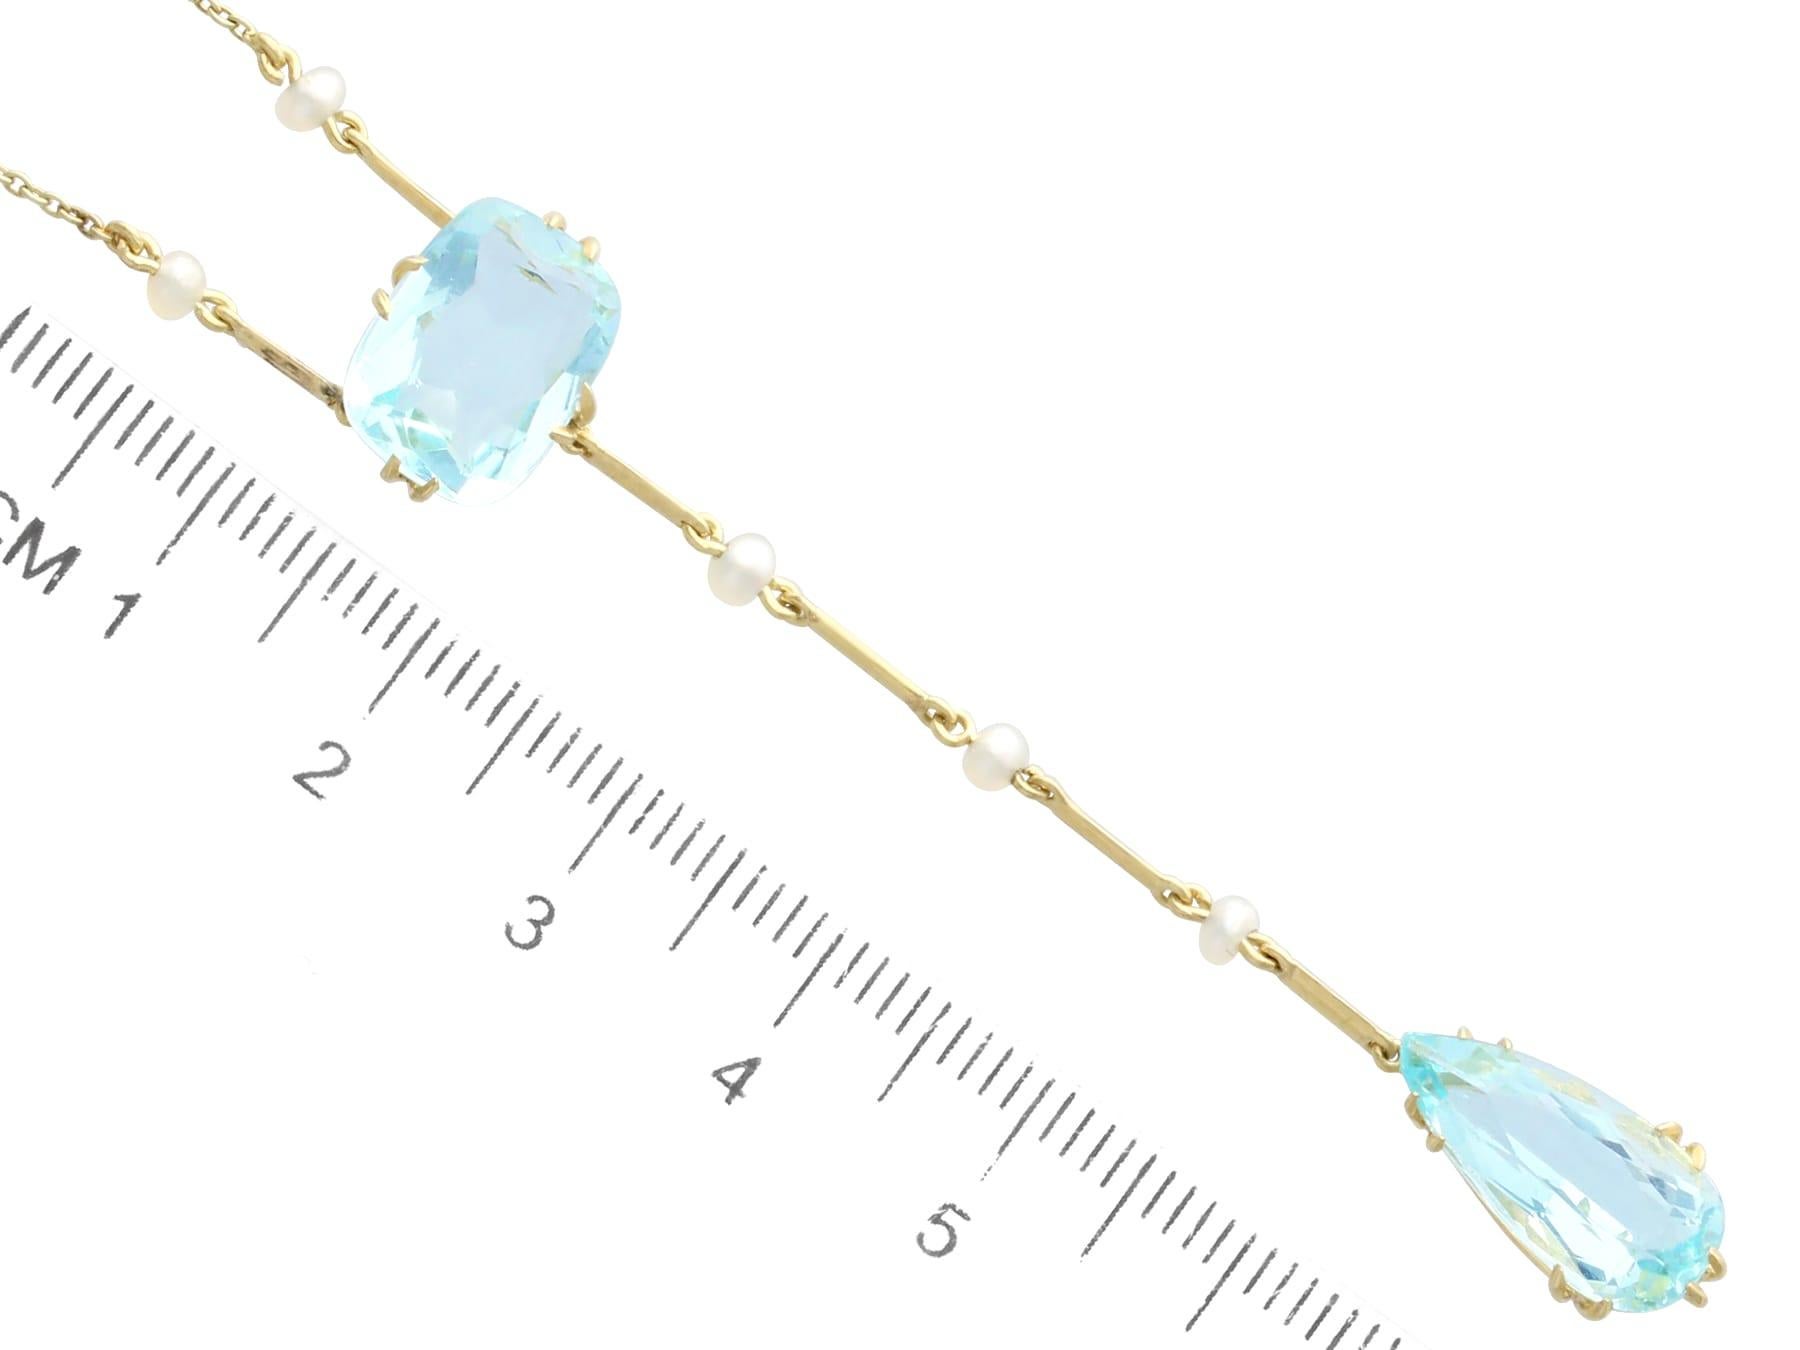 Women's or Men's Antique 8.33 Carat Aquamarine and Seed Pearl 15 Carat Yellow Gold Necklace